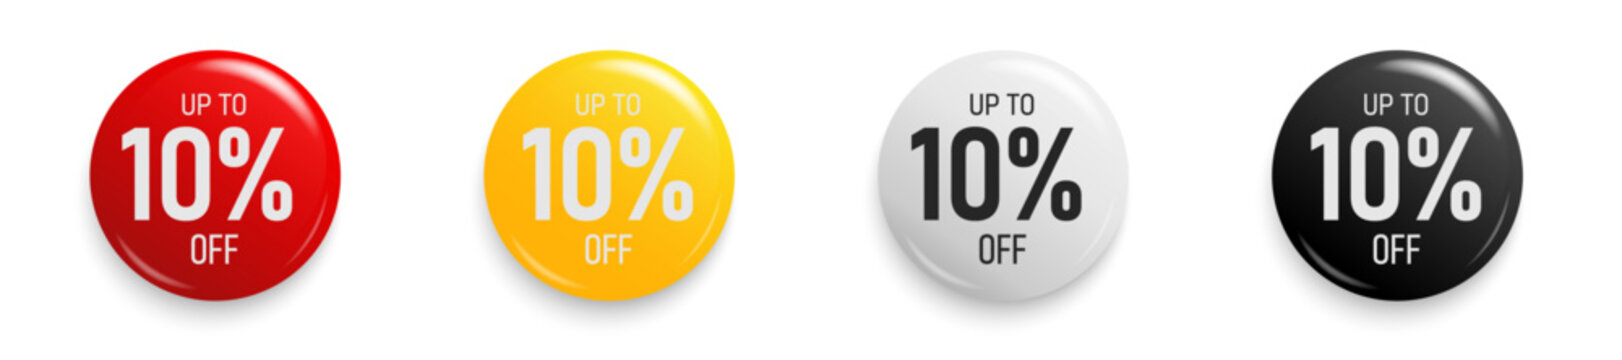 up to 10 percent discount. button sticker mockup banner. promotion sticker badge set for shopping ma